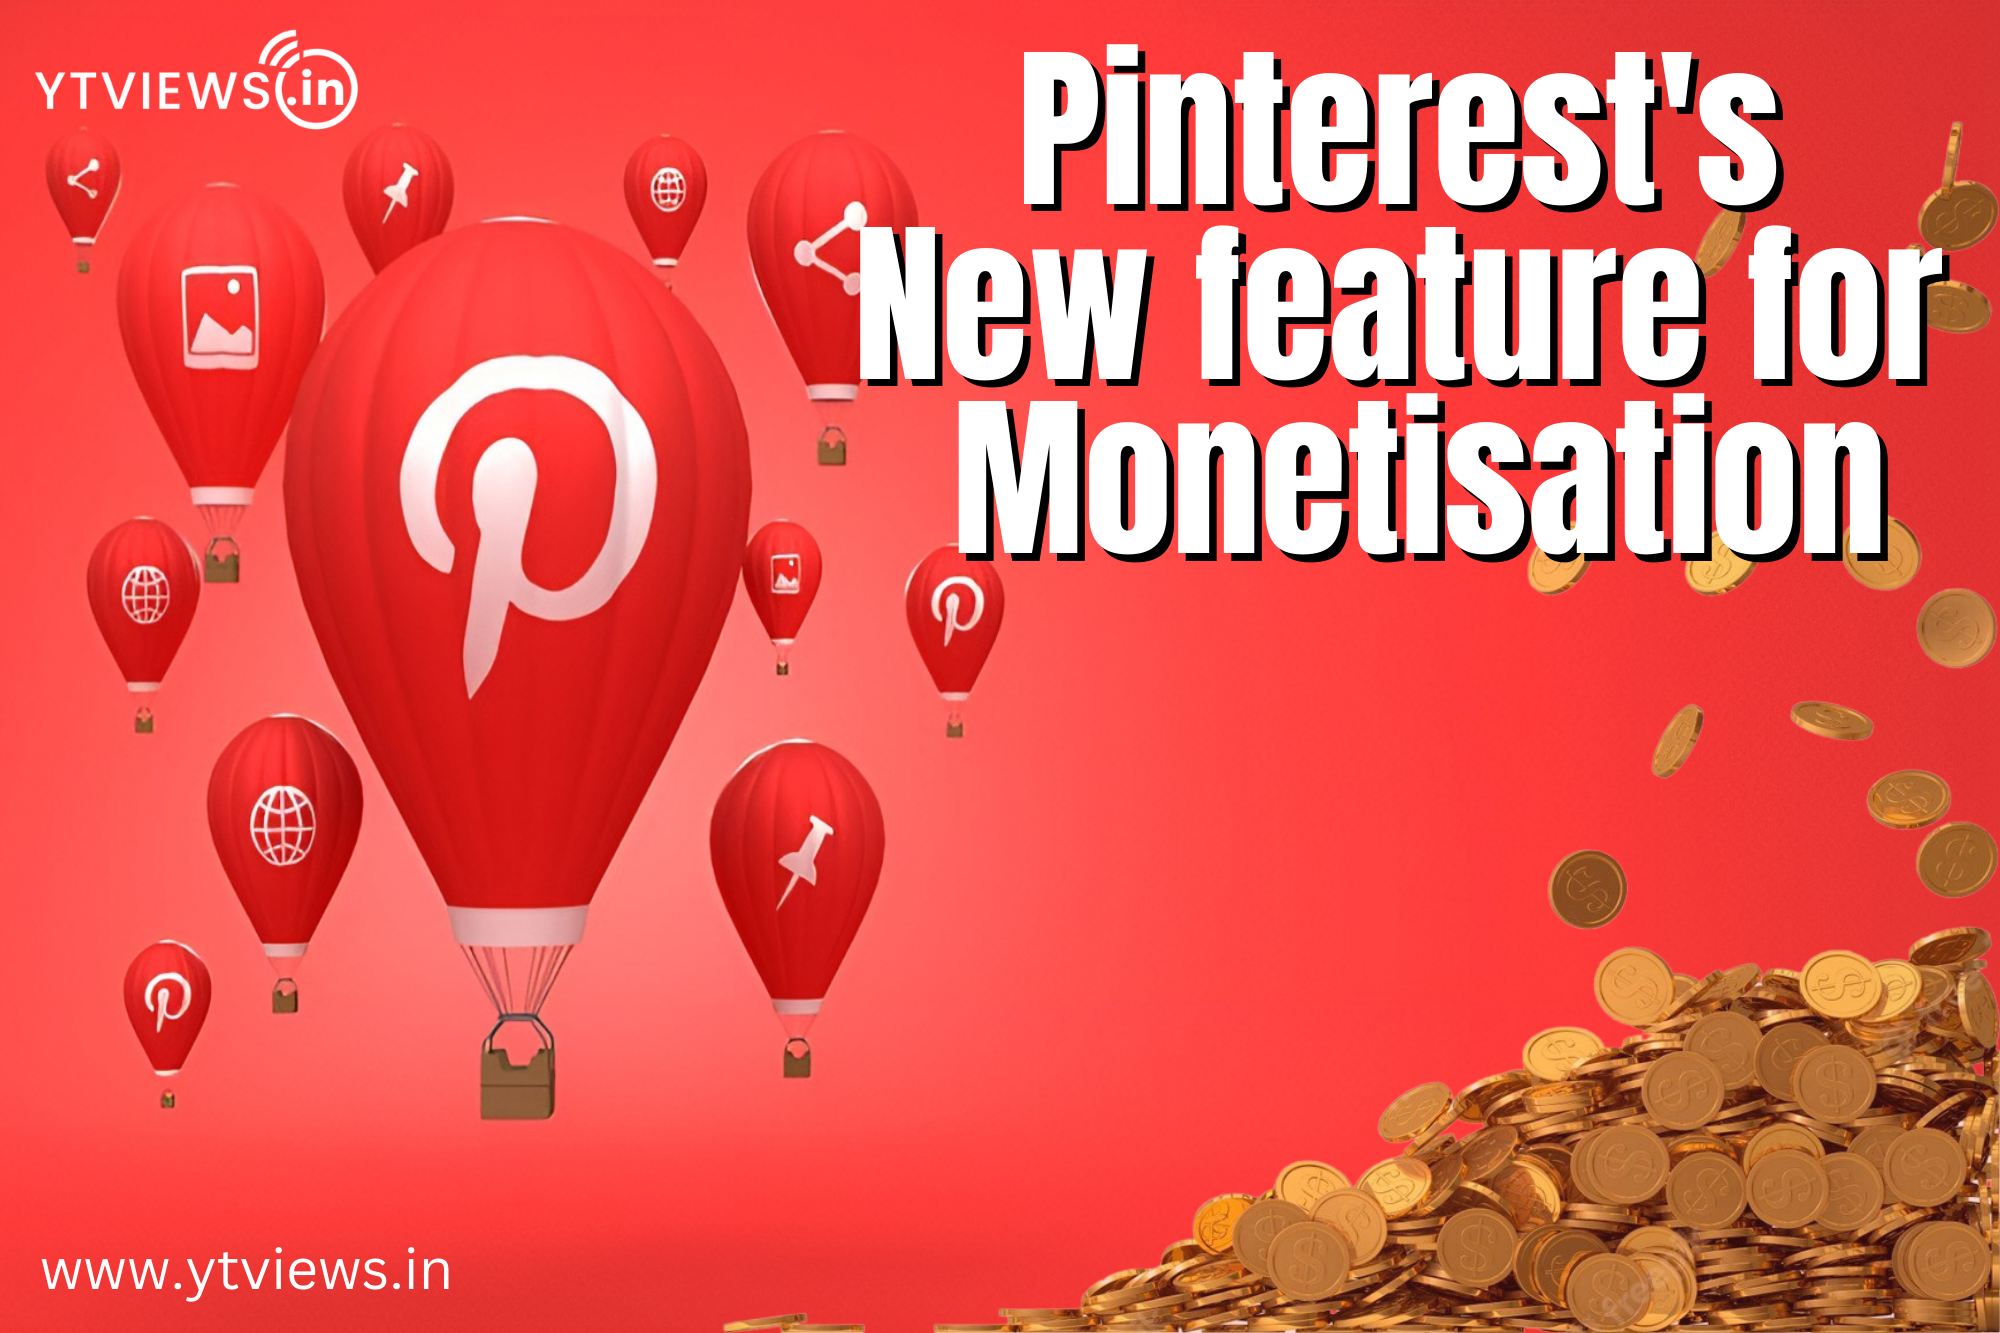 Pinterest adds an amazing feature for monetisation which is first of its kind